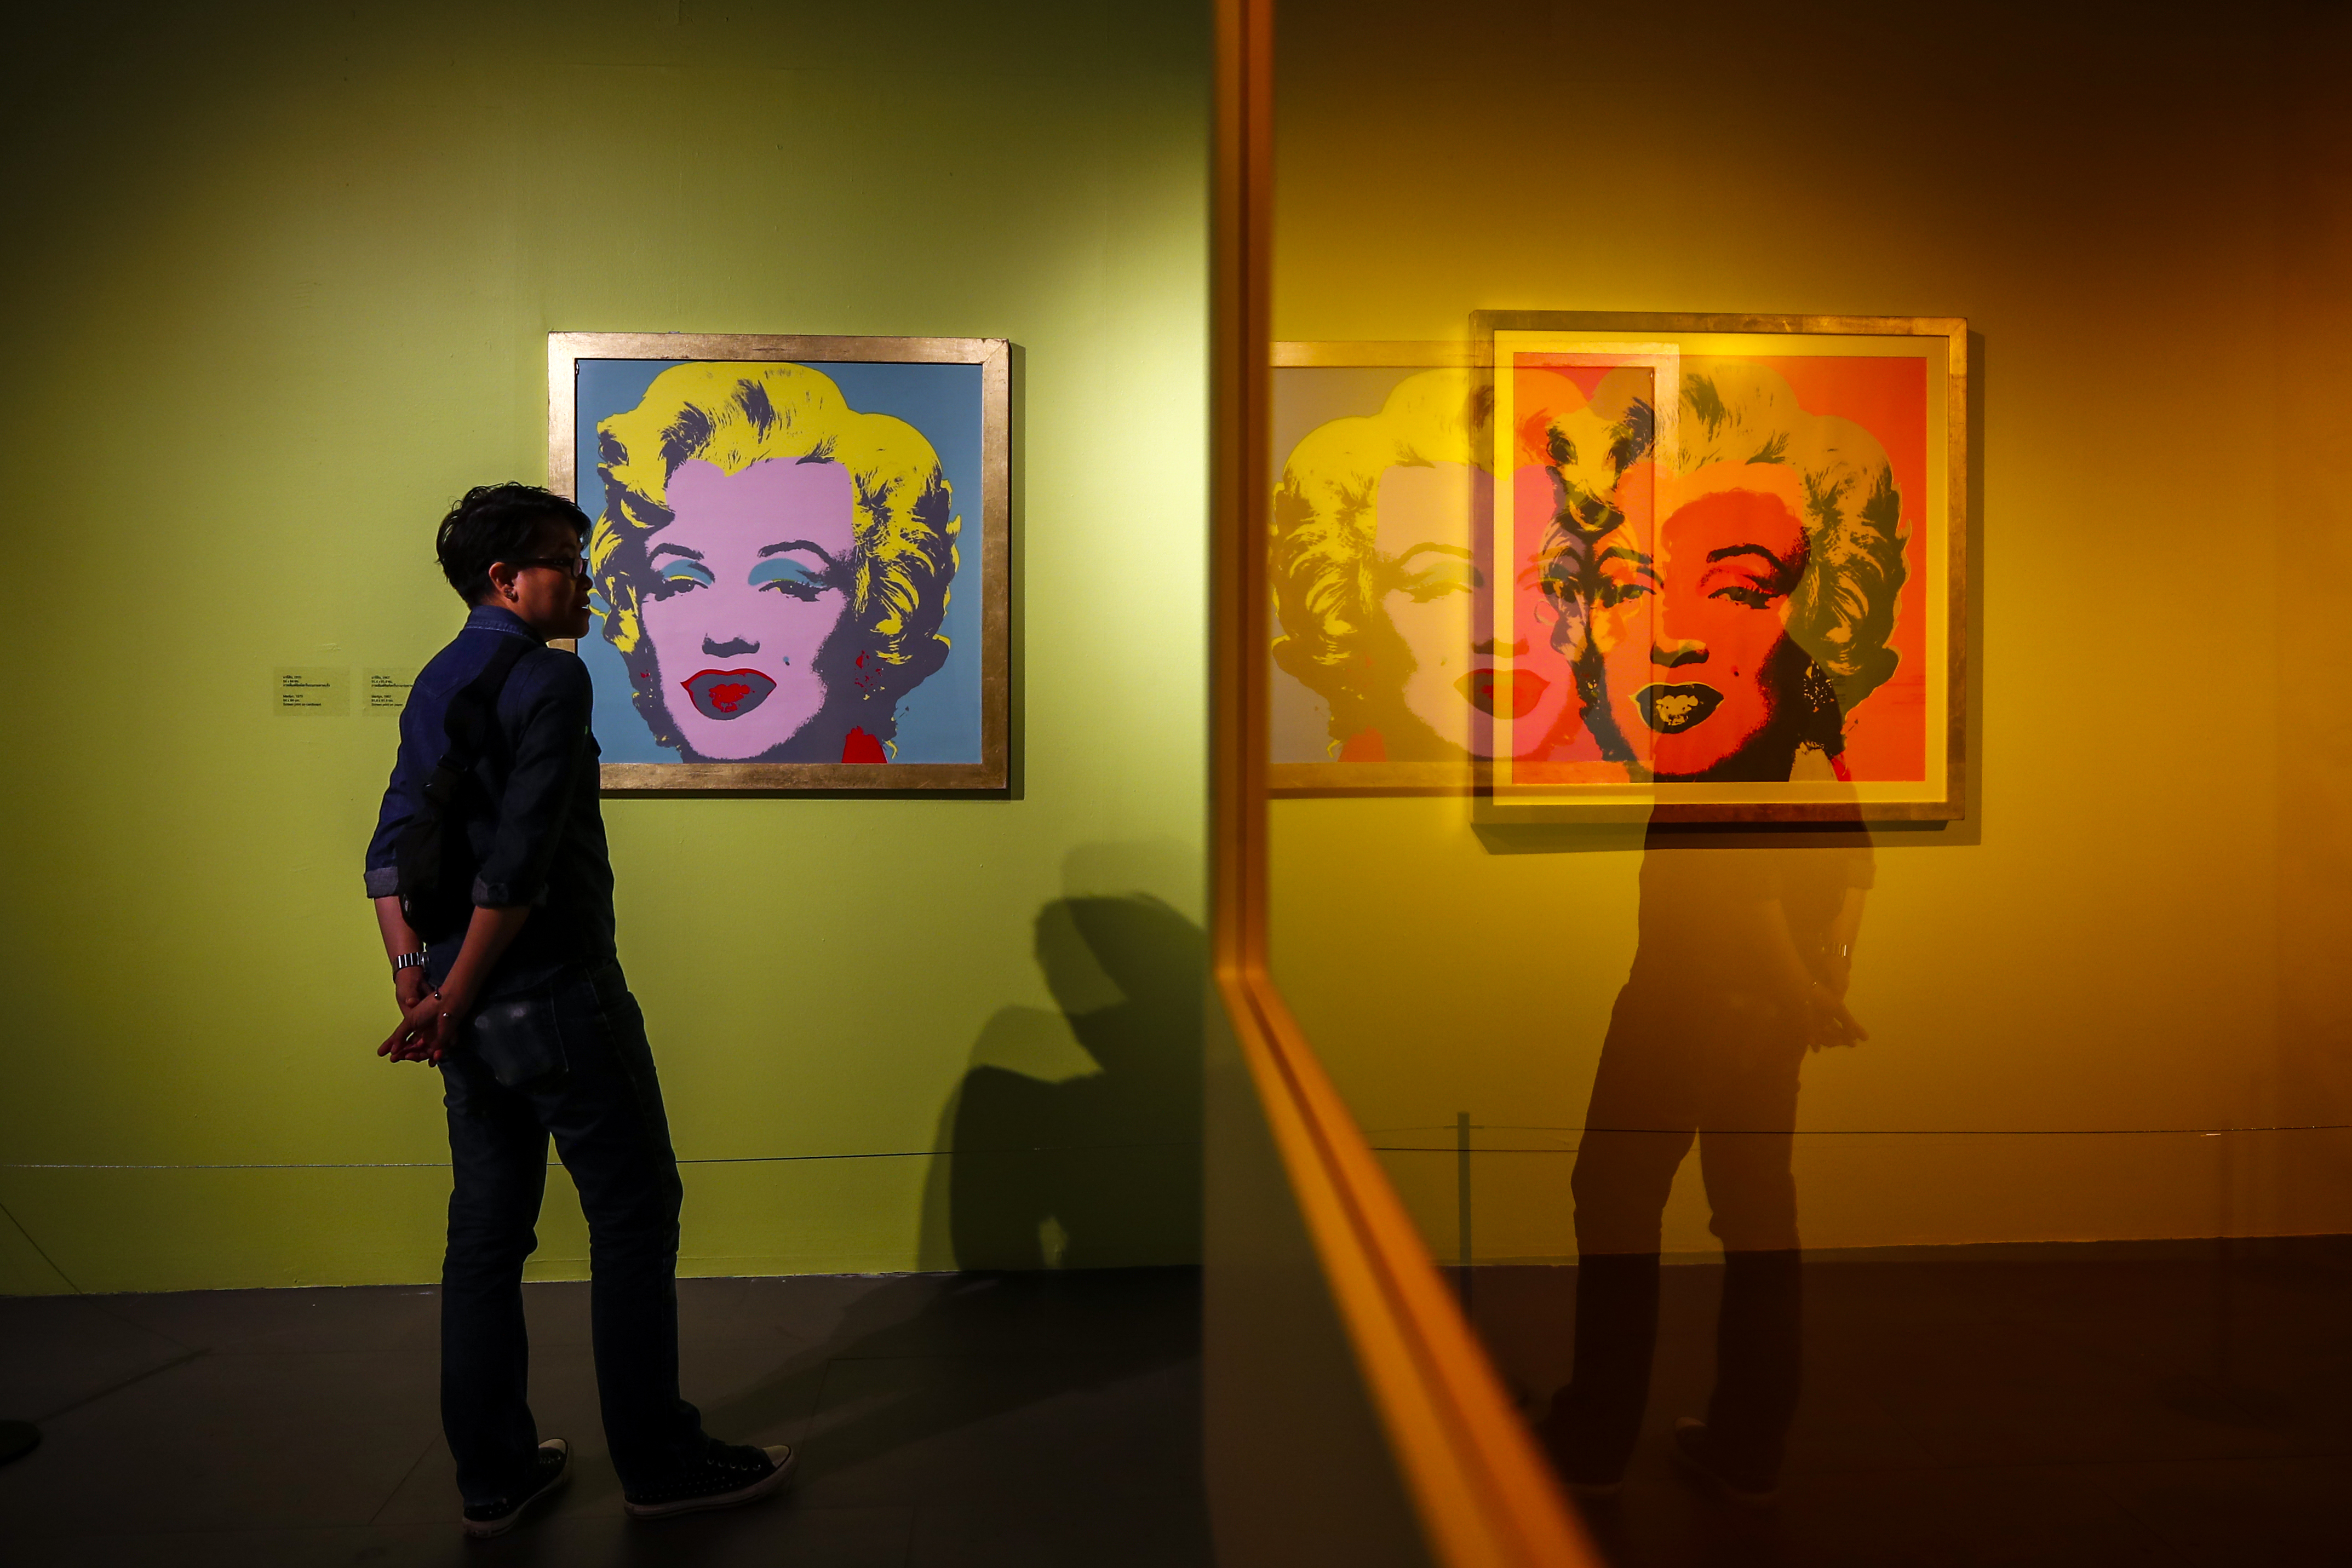 A woman looks at the 'Marilyn Monroe' series during the inauguration of the Andy Warhol Pop Art exhibit at the RCB Galleria in Bangkok, Thailand, 11 August 2020. 